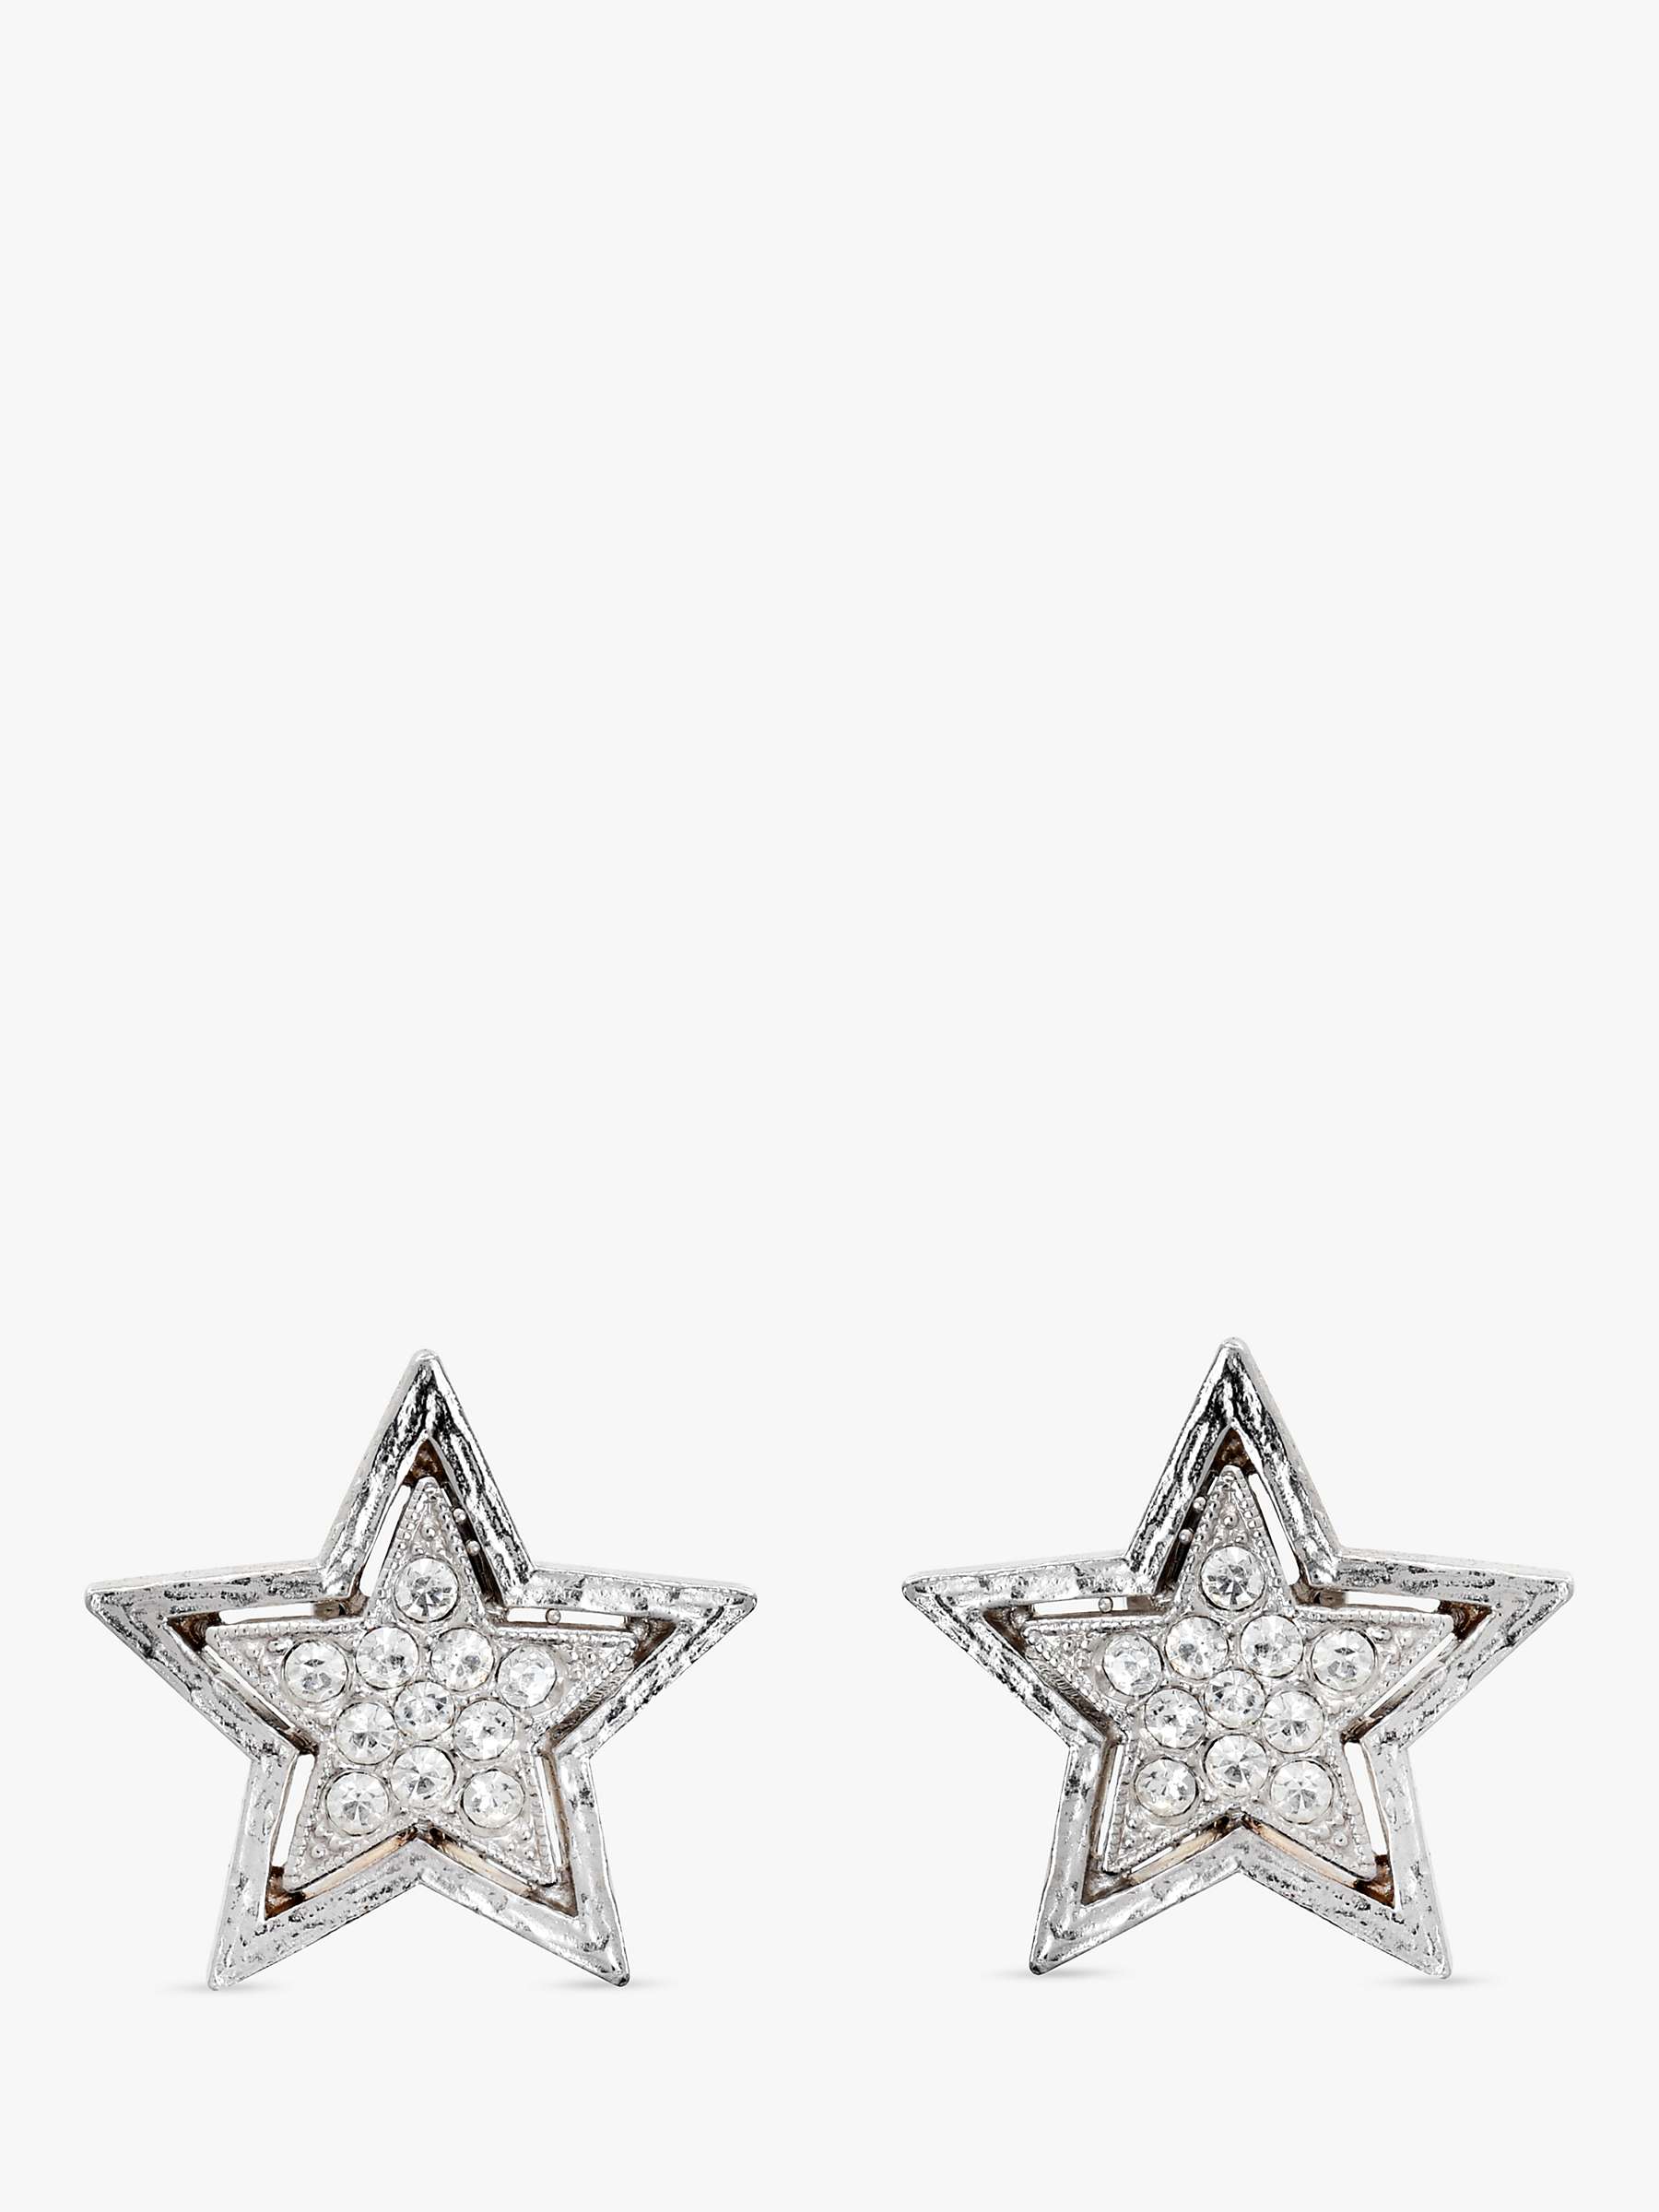 Buy Eclectica Vintage Star Emblem Clip On Earrings, Dated Circa 1980s Online at johnlewis.com